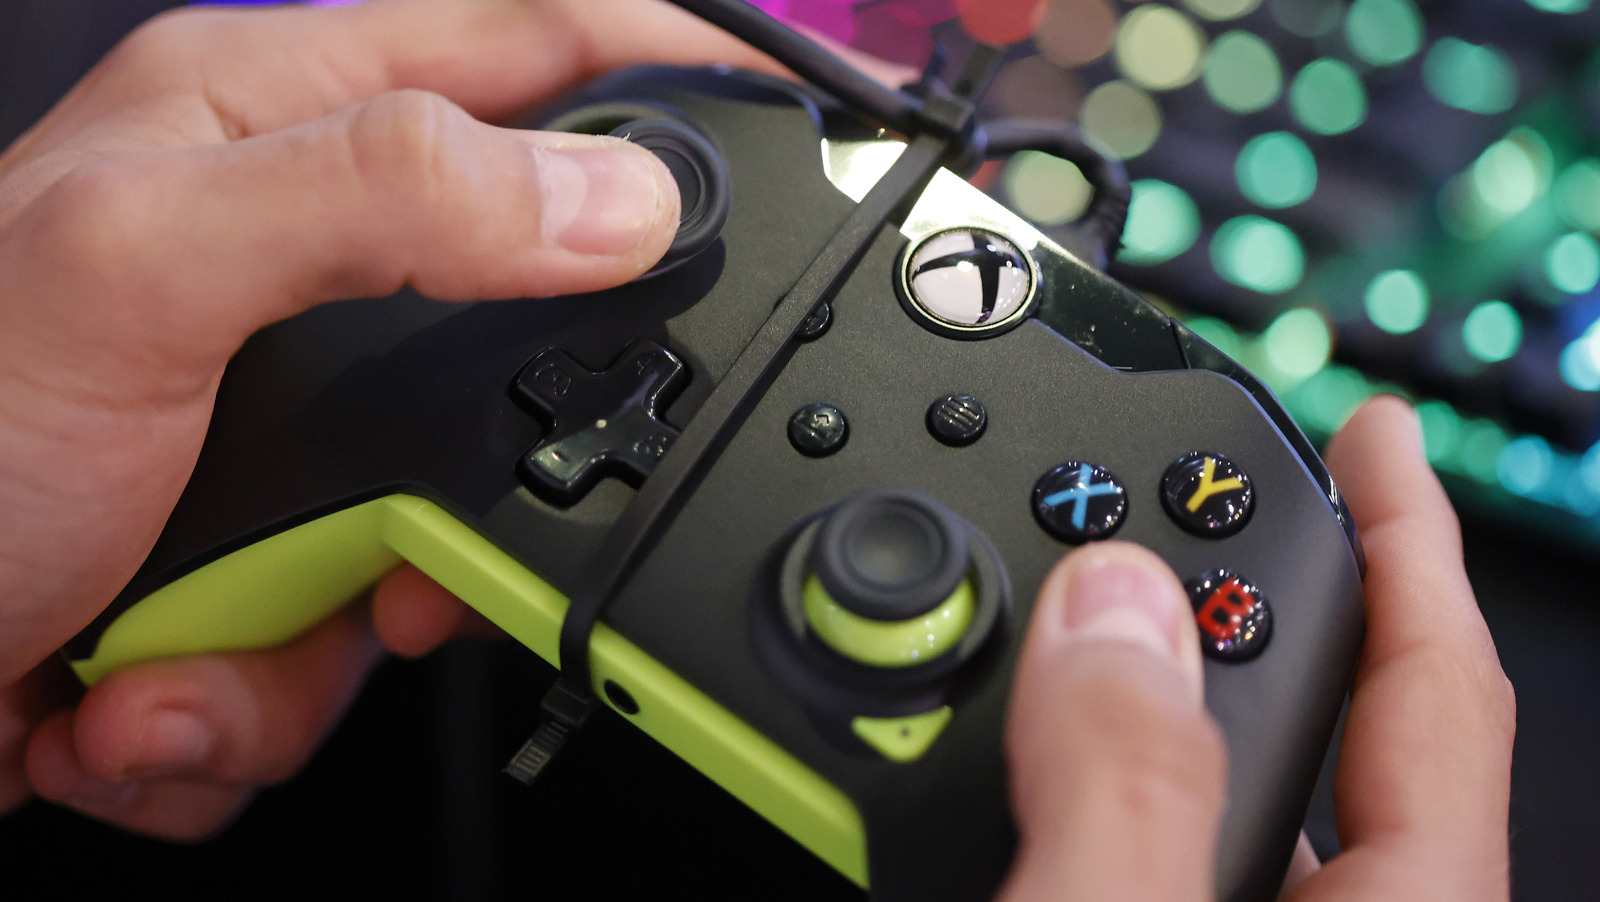 5 Of The Strangest Xbox Controllers We’ve Ever Seen – SlashGear